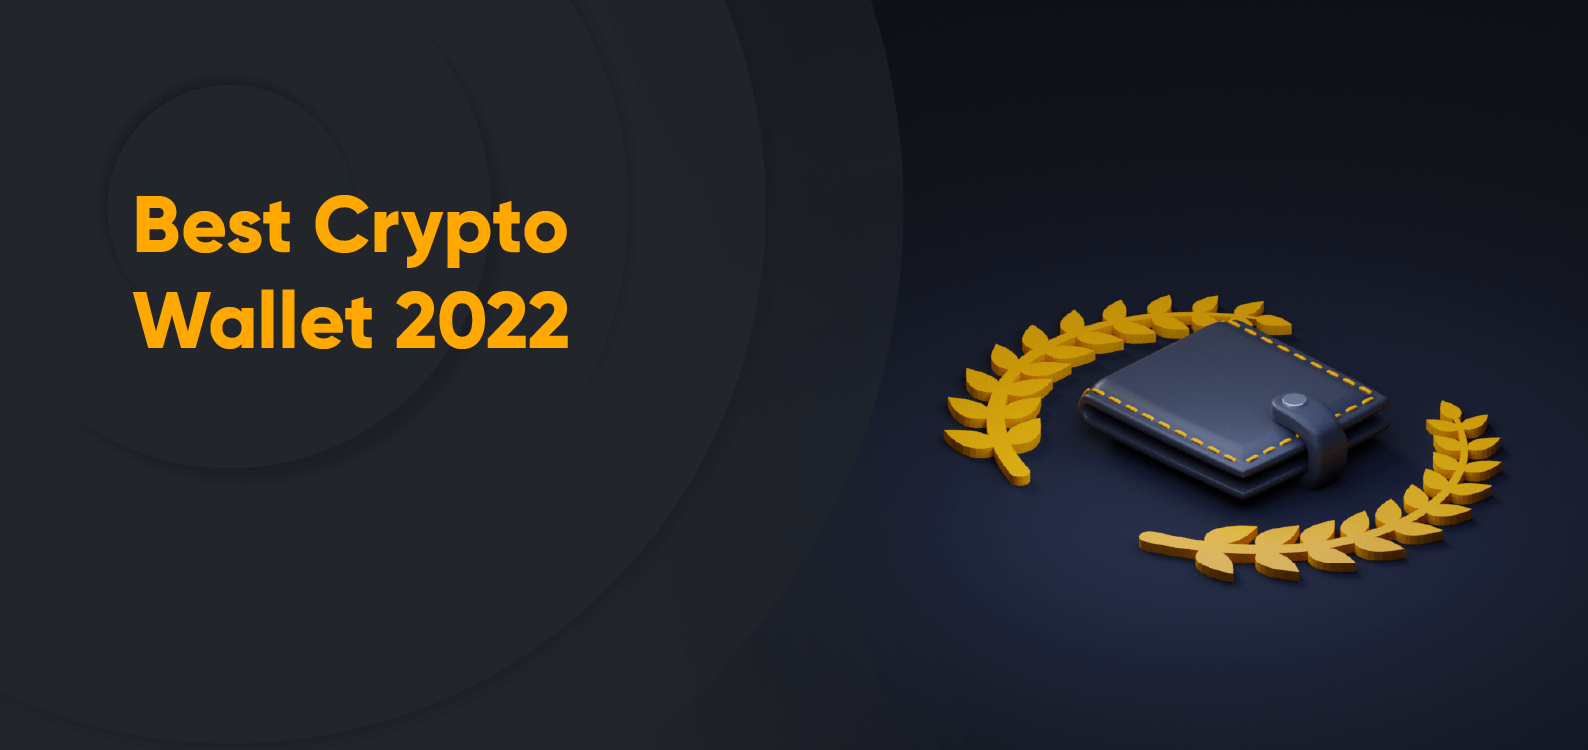 the best crypto wallet 2022